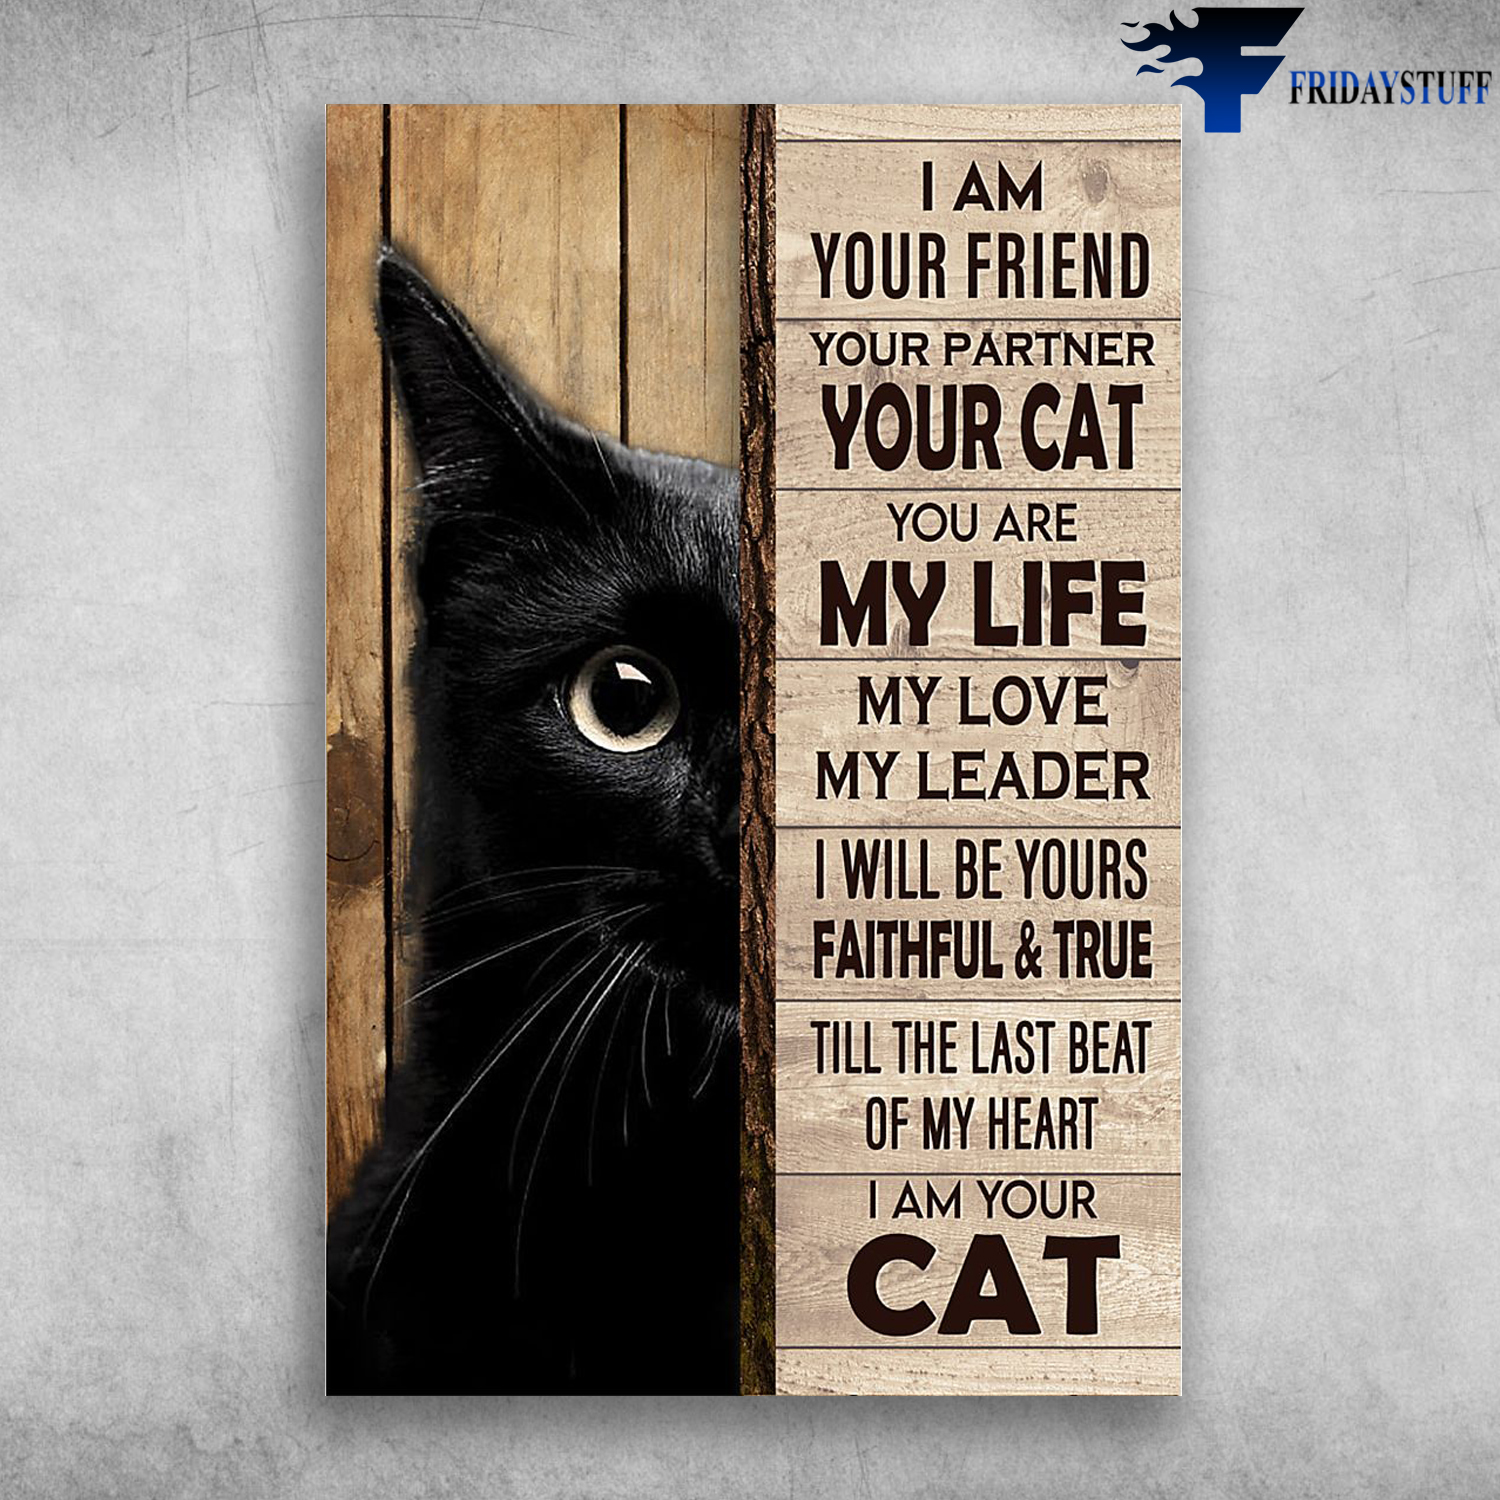 Cute Black Cat - I Am Your Friend, Your Partner, Your Cat, You Are My Life